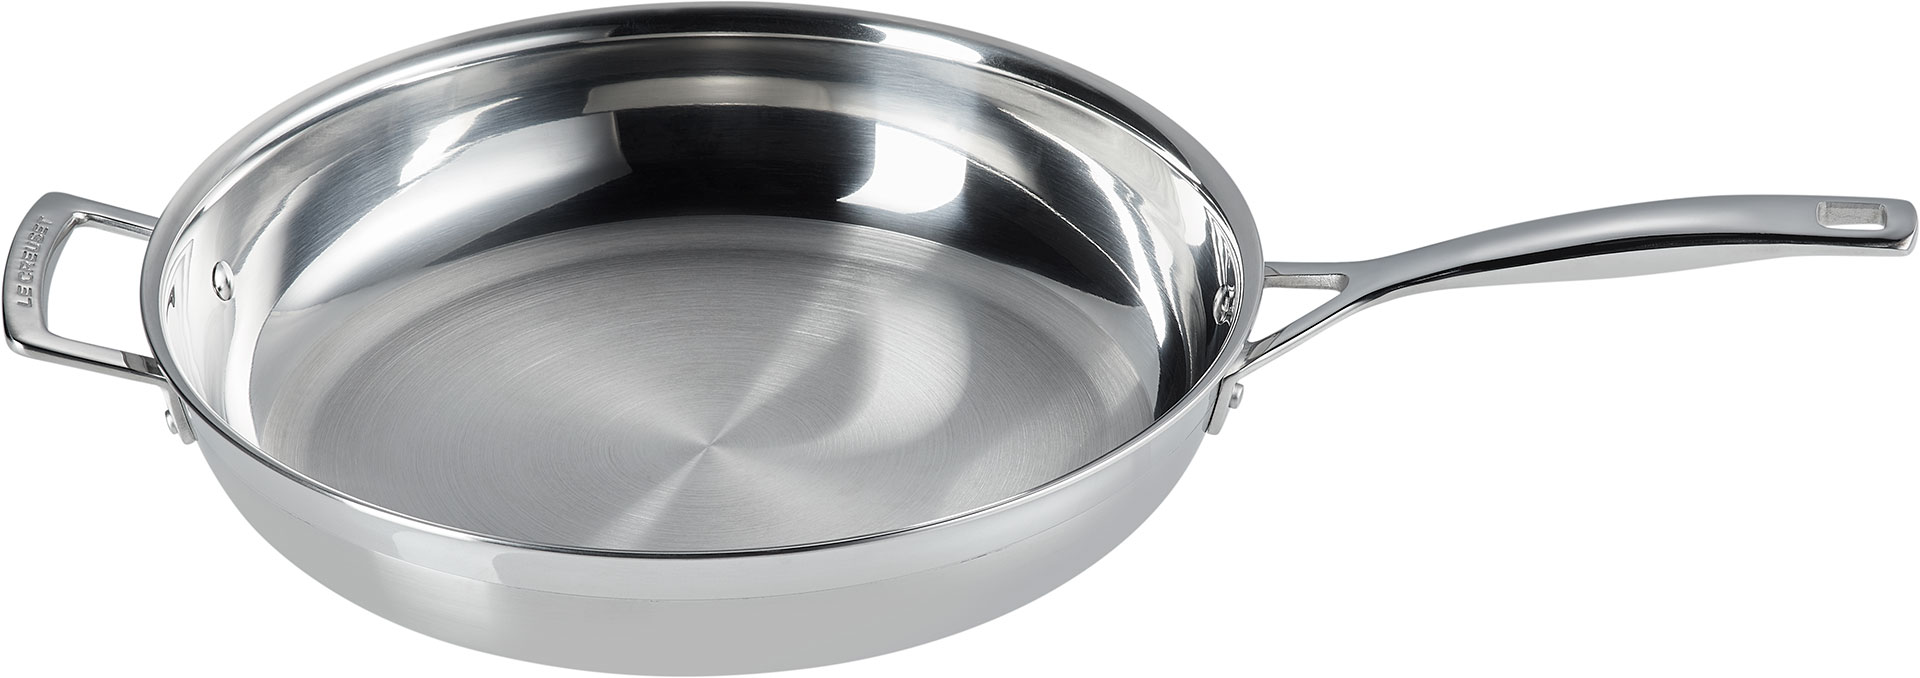 Le Creuset 3-Ply Stainless Steel Uncoated Frying Pan 32cm